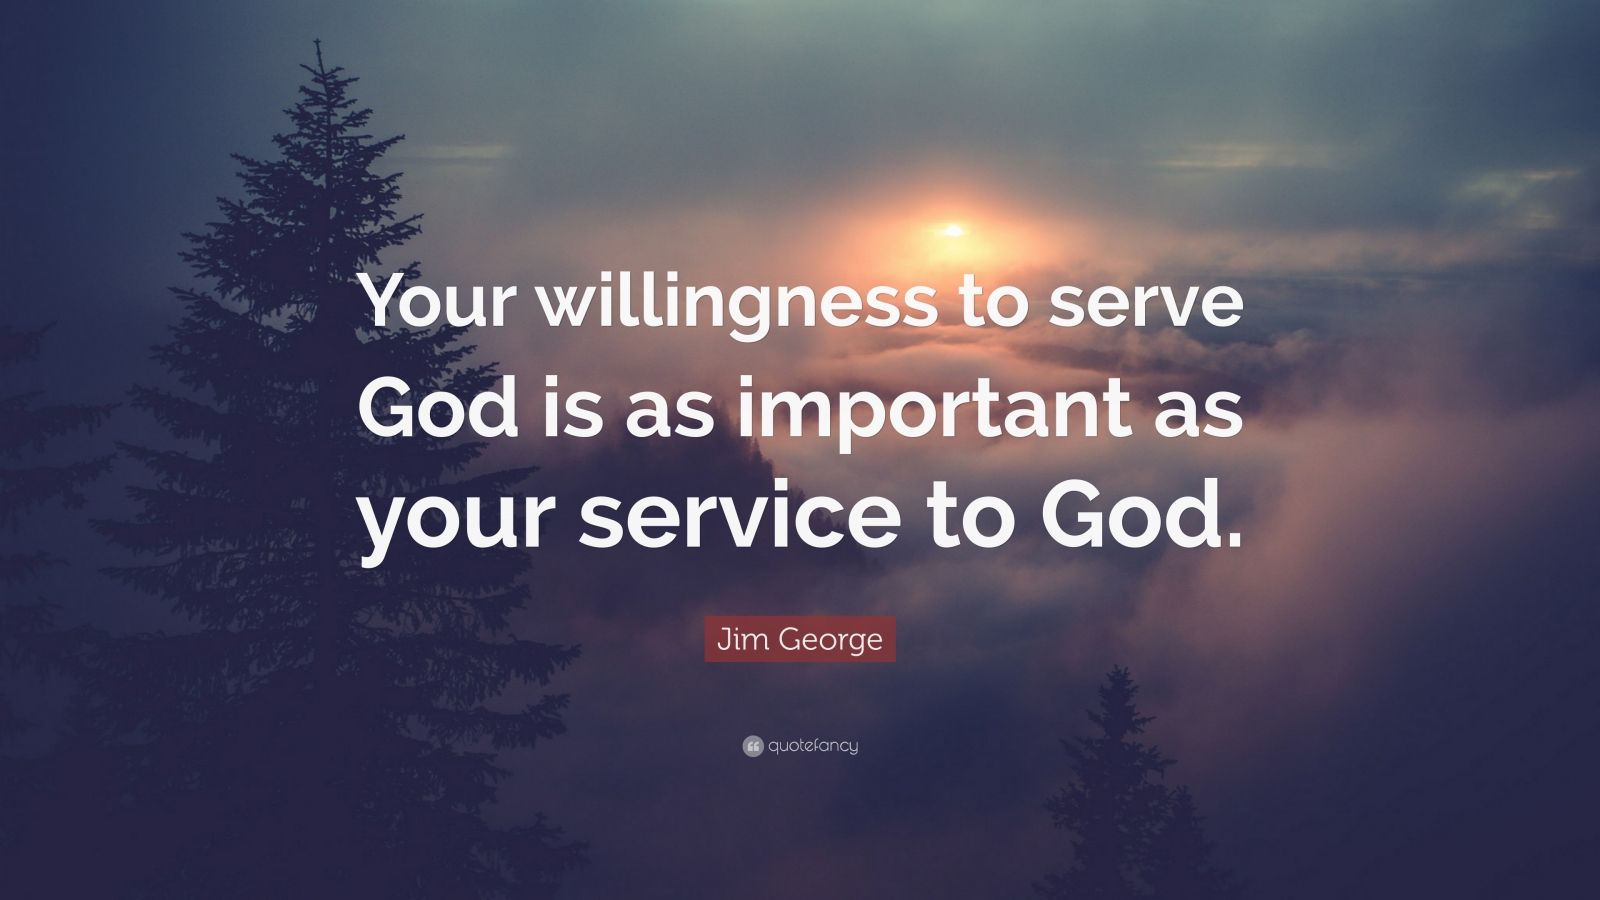 Jim George Quote: “Your willingness to serve God is as important as ...